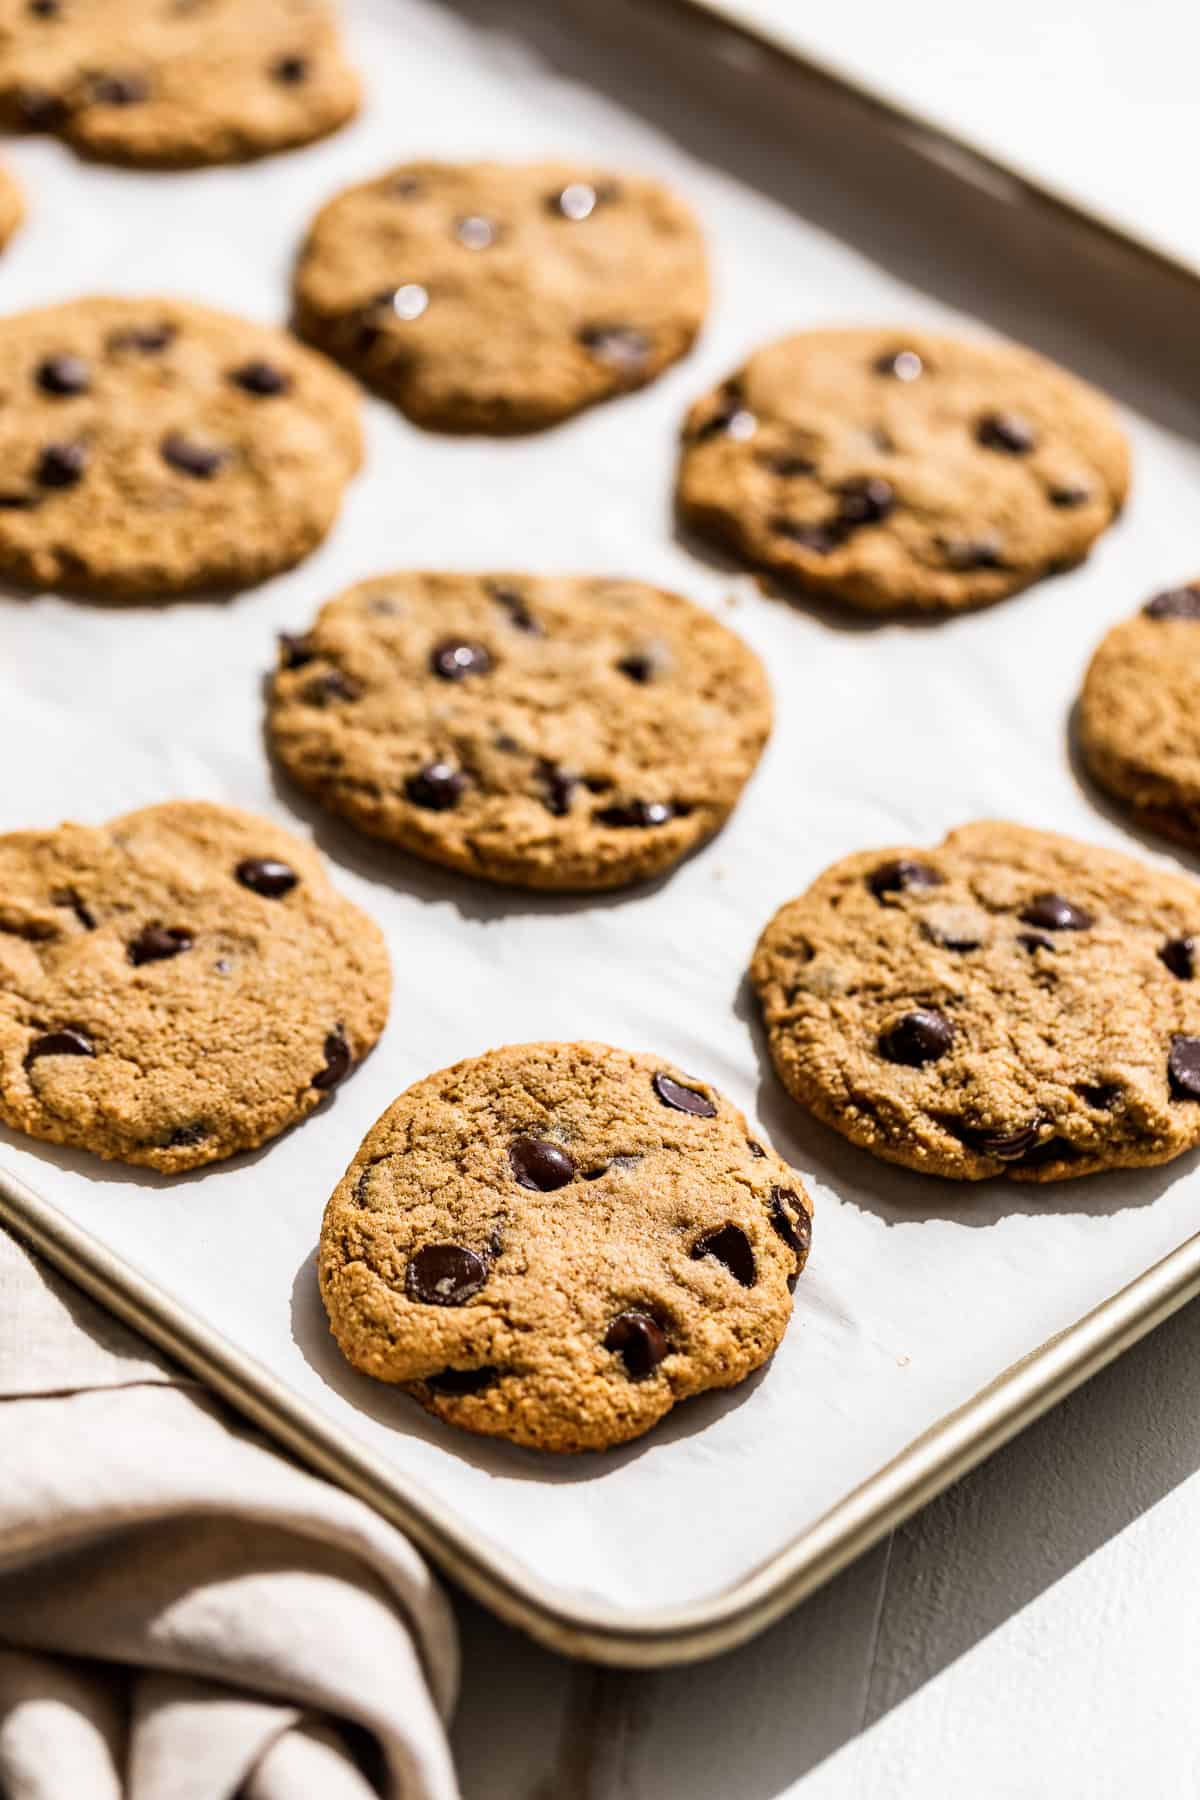 Chocolate Chip Cookies on a parchment lined baking sheet.